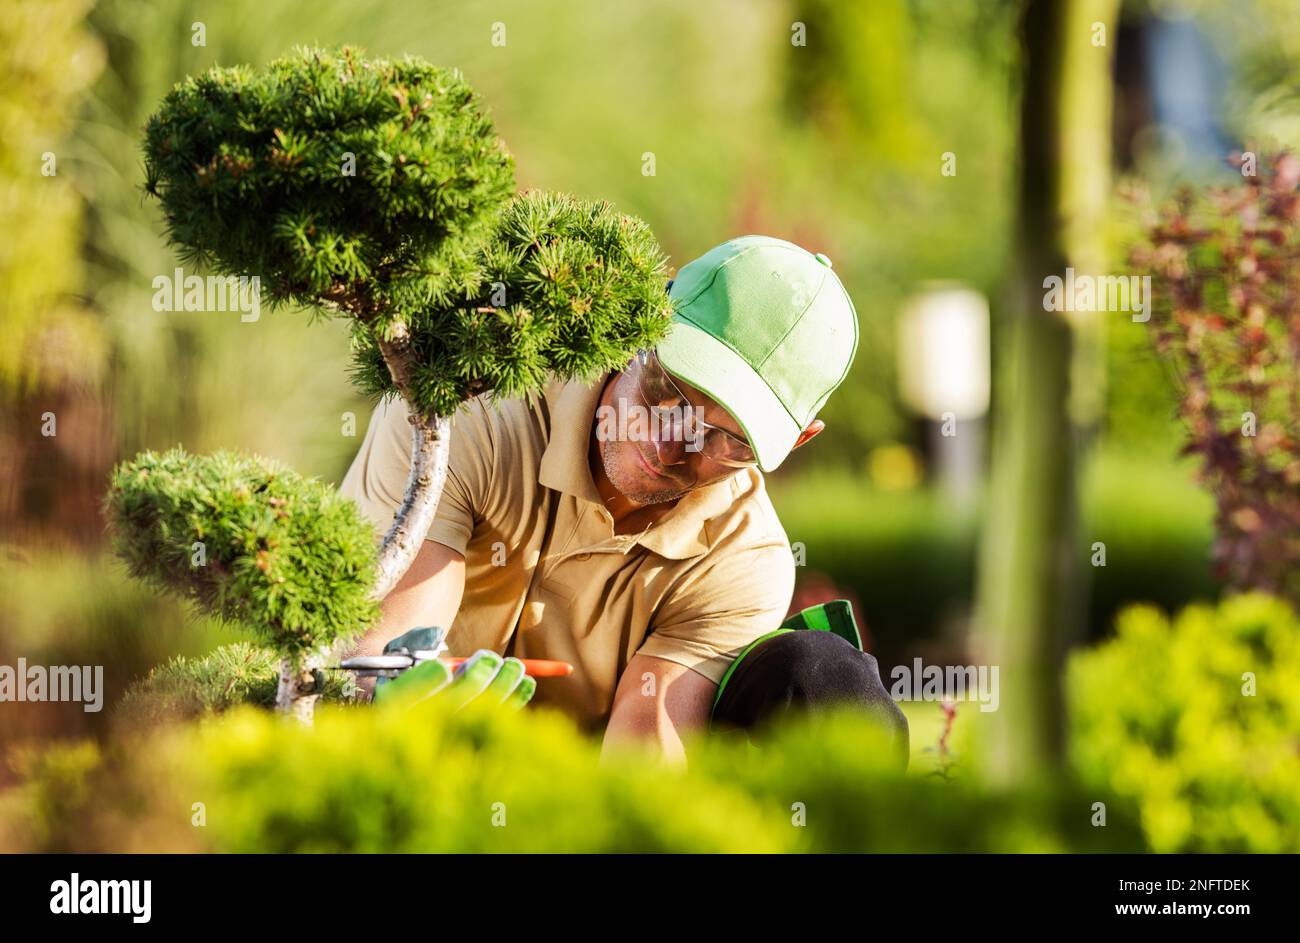 Closeup of Professional Caucasian Gardener Focused on Trimming the Decorative Garden Tree with Pruning Shears Tool. Stock Photo